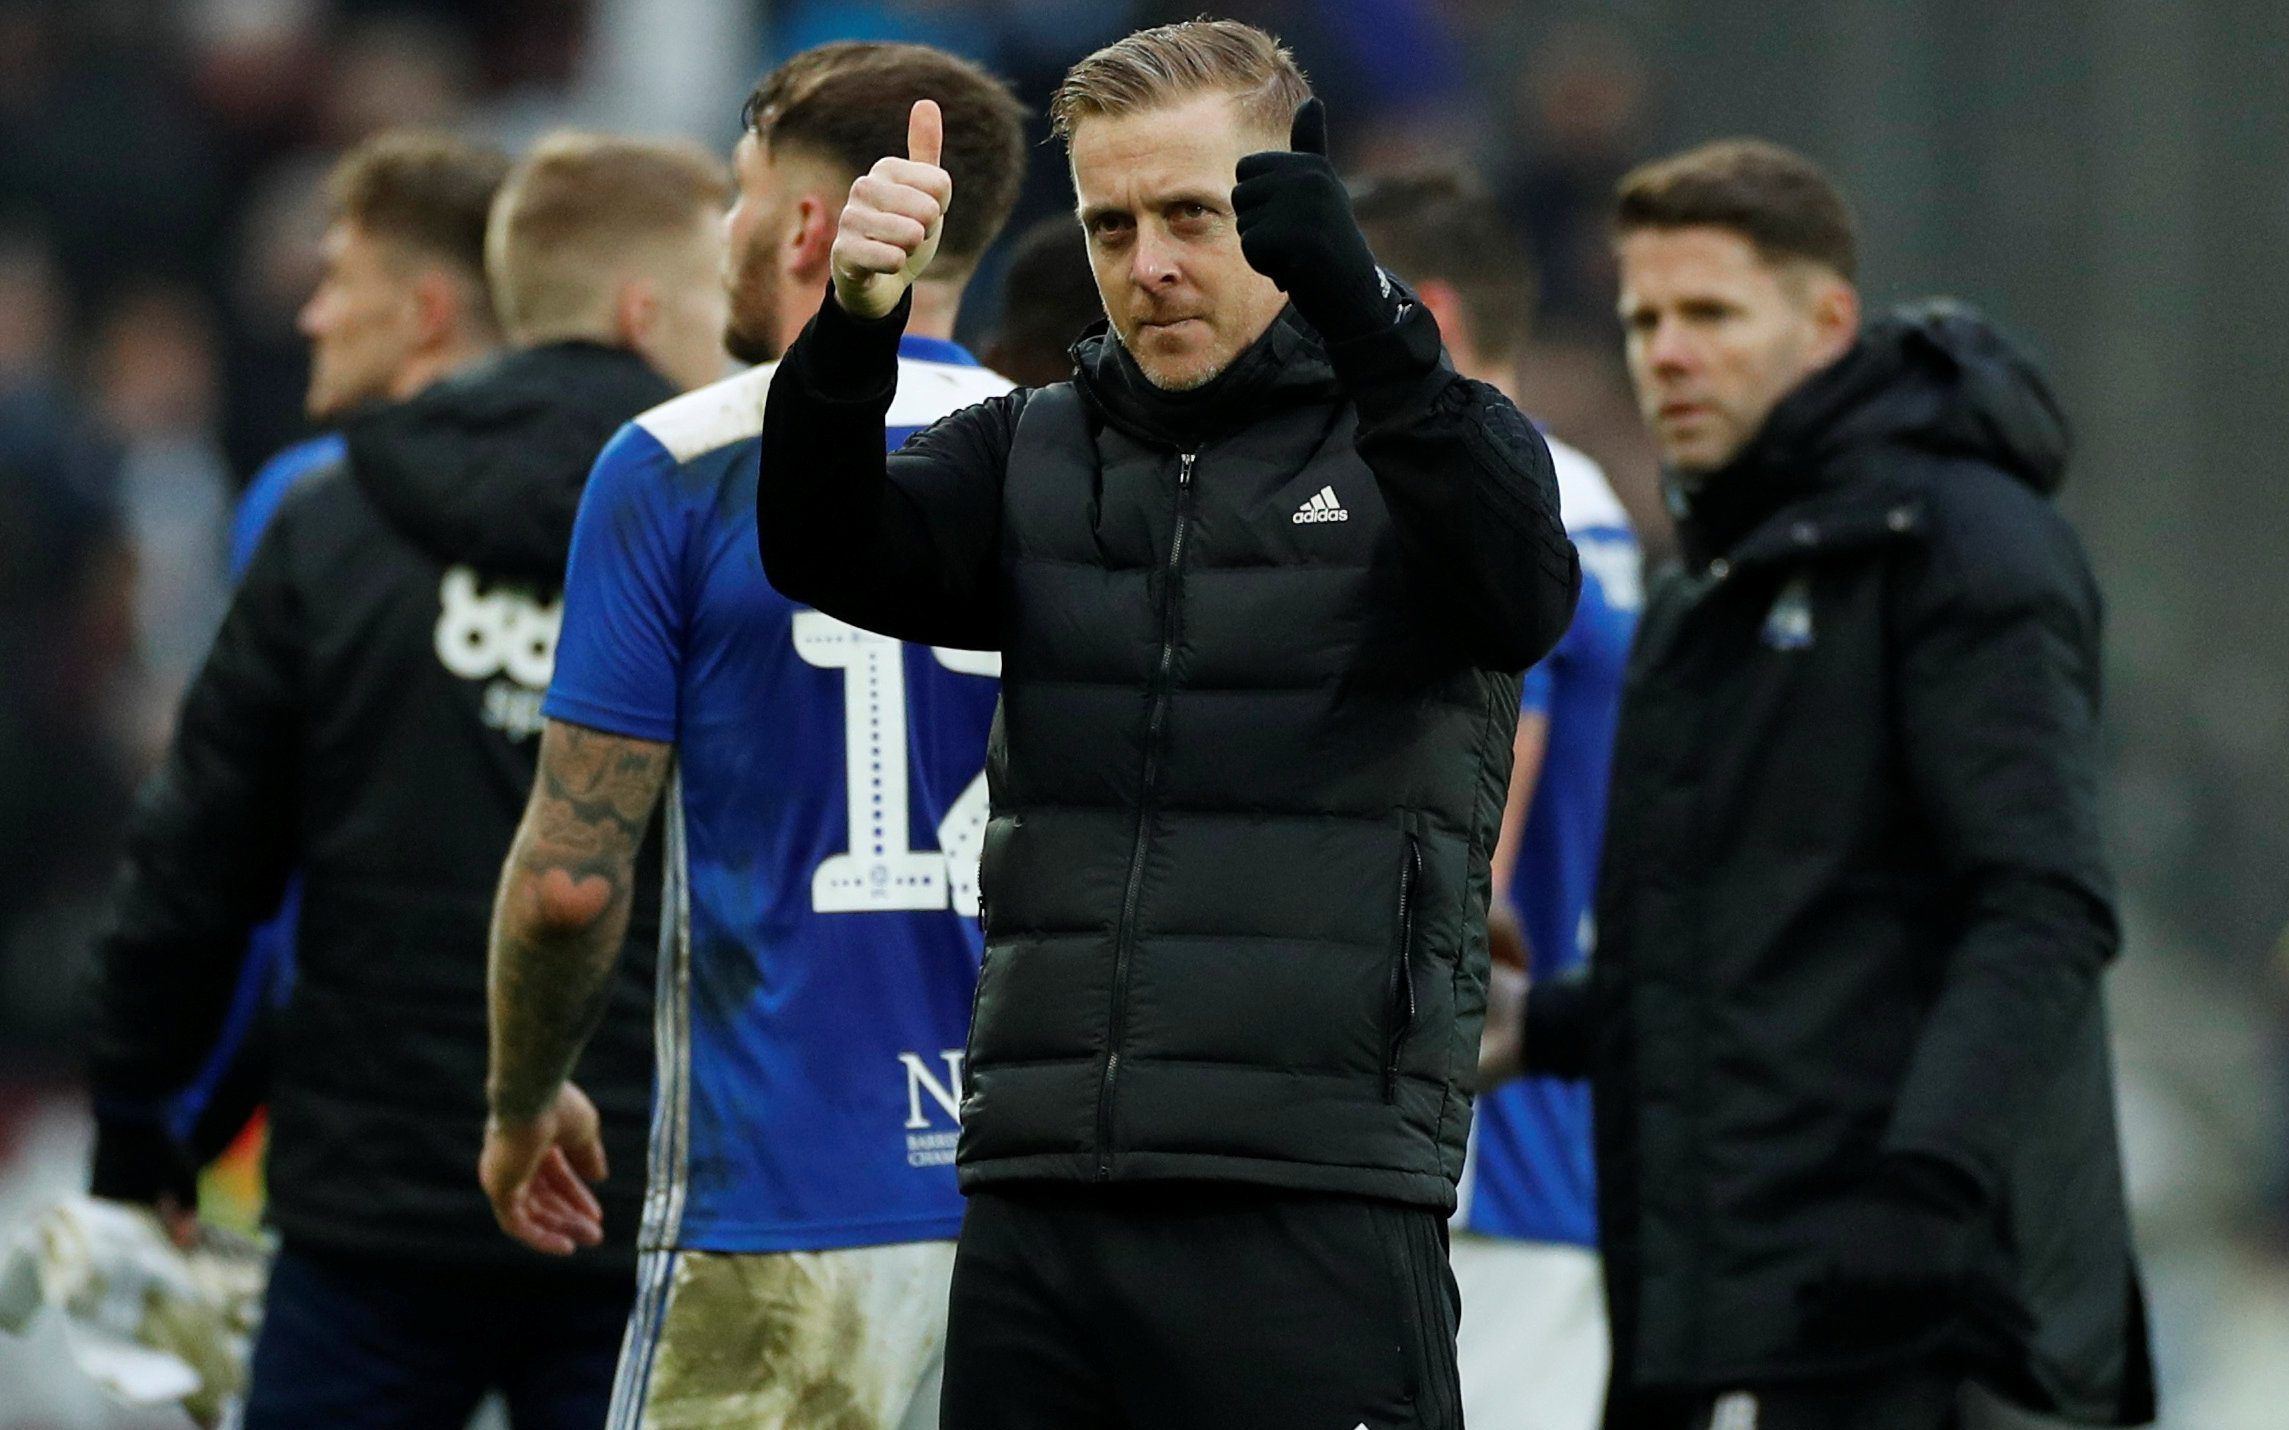 Soccer Football - FA Cup Third Round - West Ham United v Birmingham City - London Stadium, London, Britain - January 5, 2019  Birmingham City manager Garry Monk celebrates after the match                    Action Images via Reuters/John Sibley